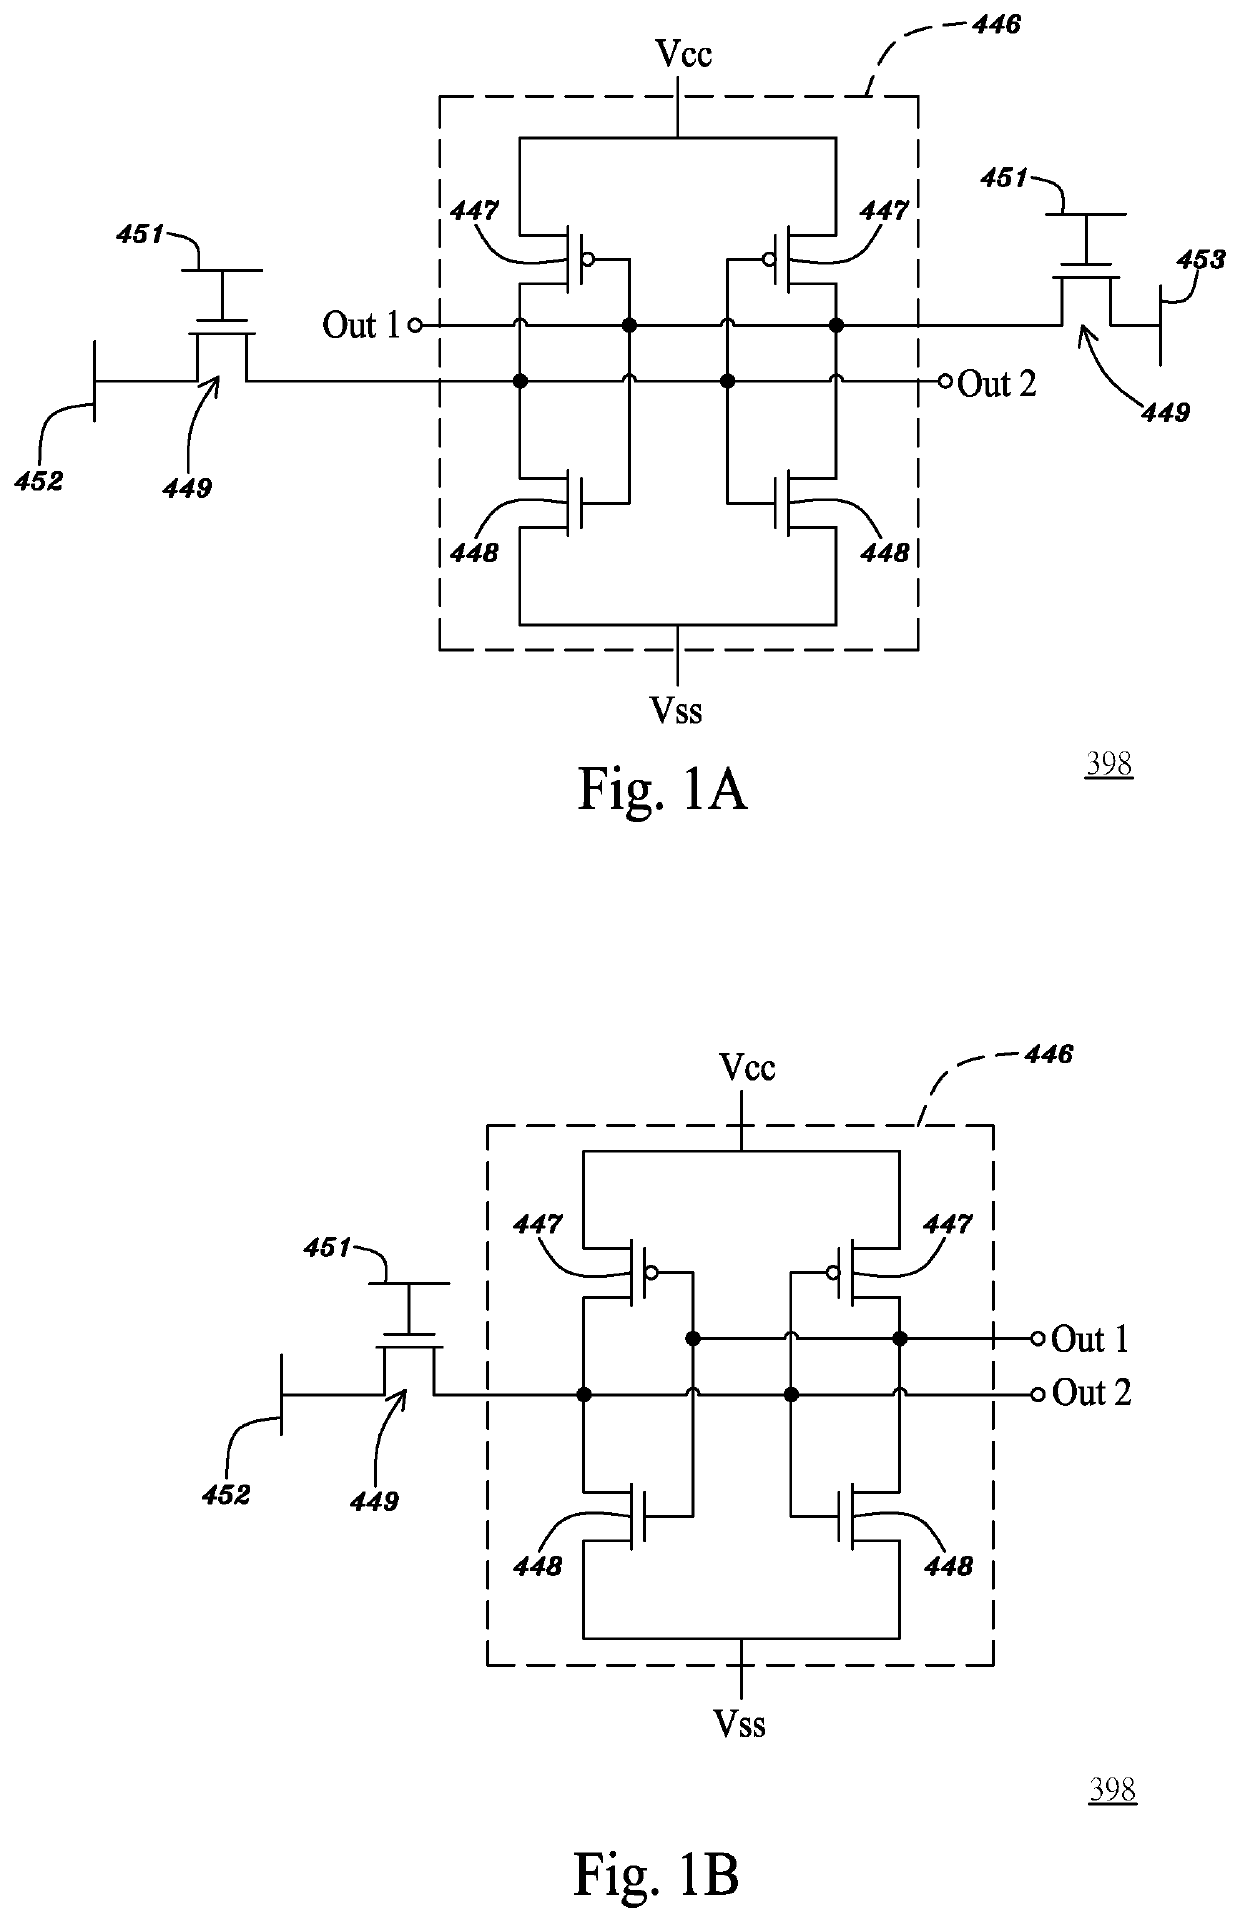 Logic drive based on chip scale package comprising standardized commodity programmable logic IC chip and memory IC chip